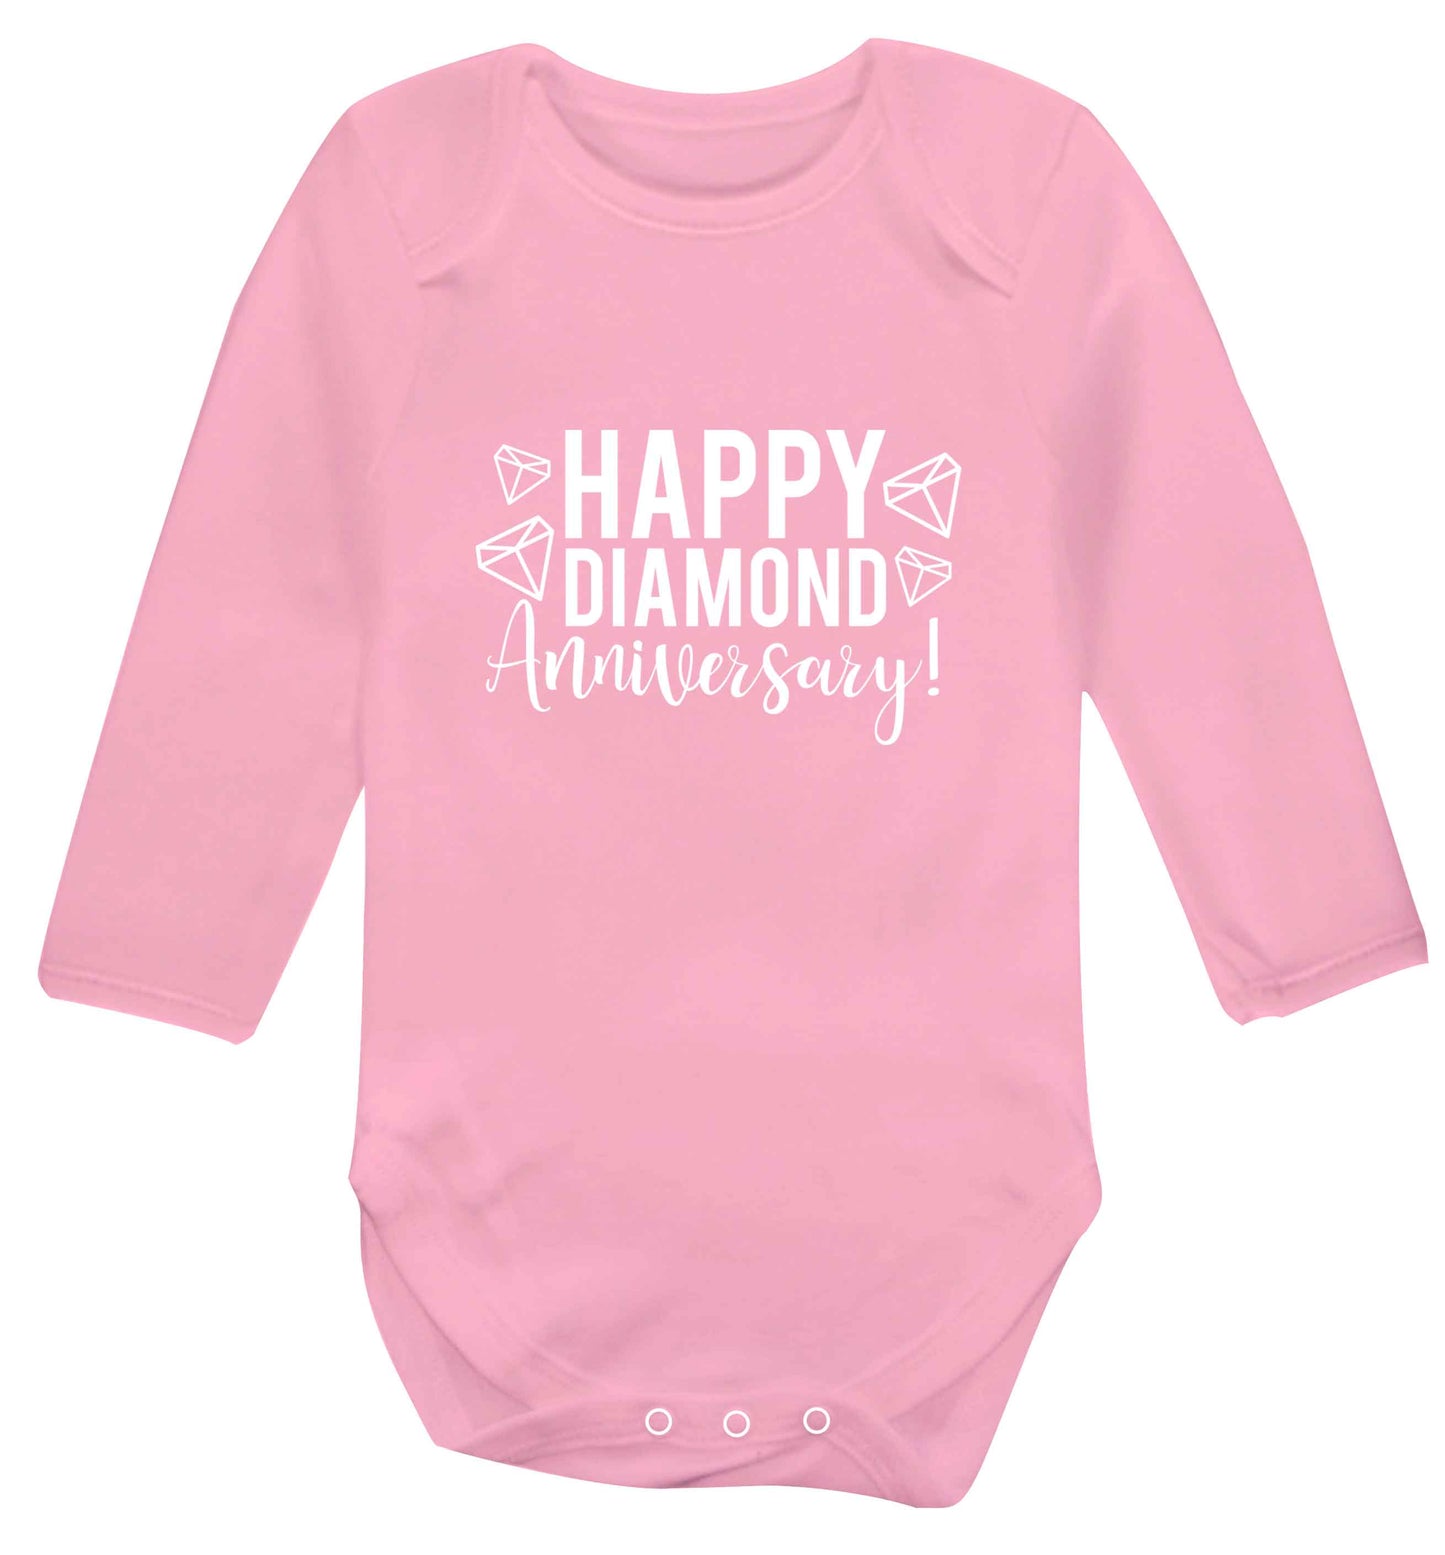 Happy diamond anniversary! baby vest long sleeved pale pink 6-12 months